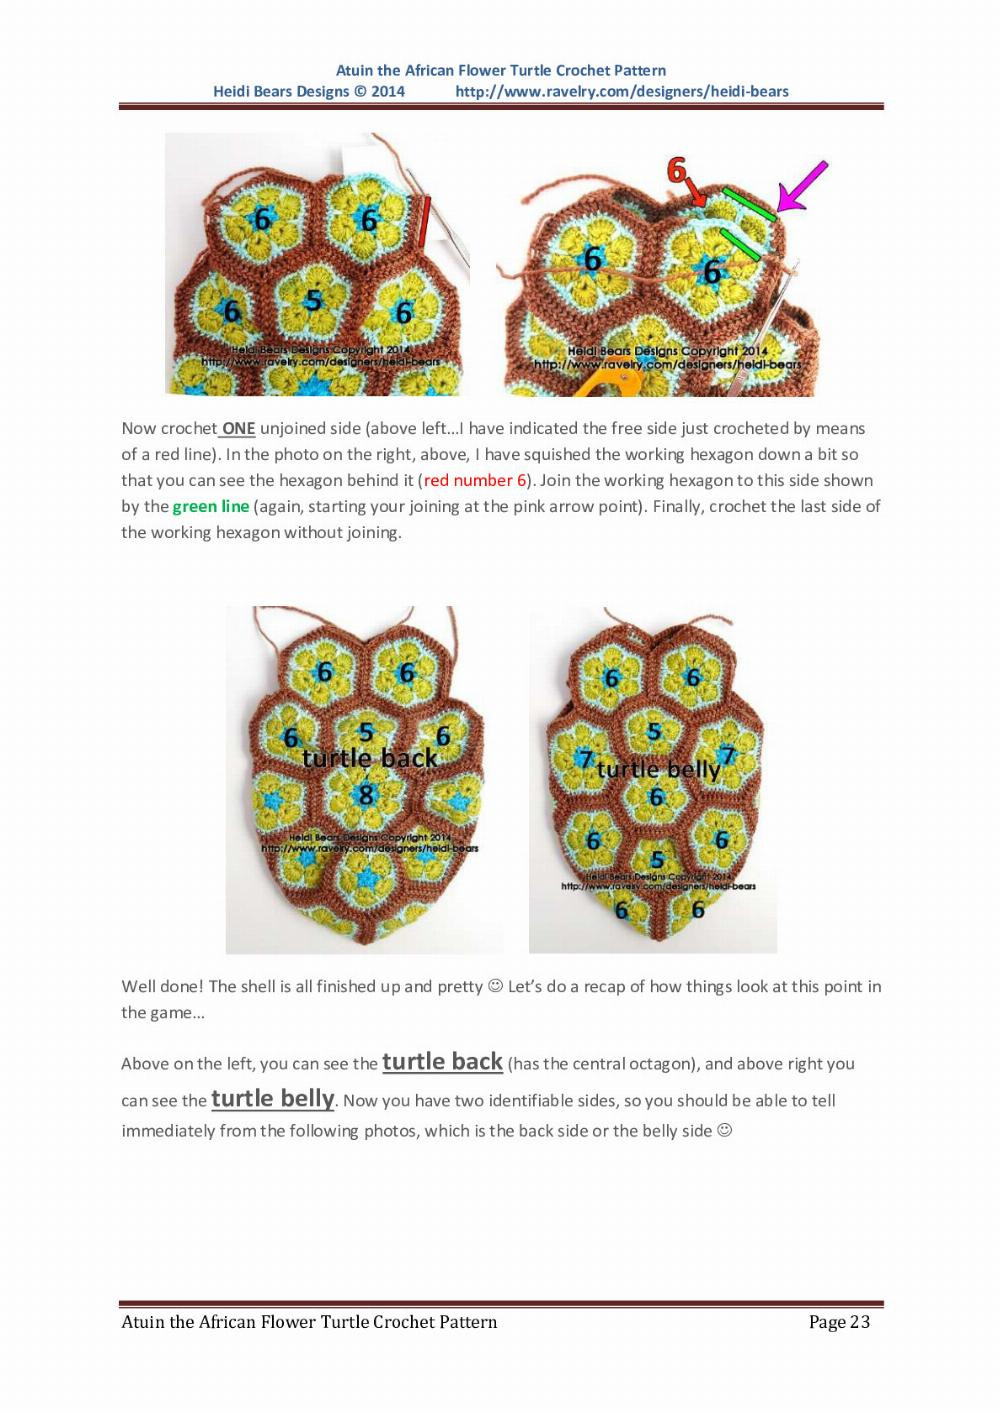 Atuin the African Flower Turtle Crochet Pattern